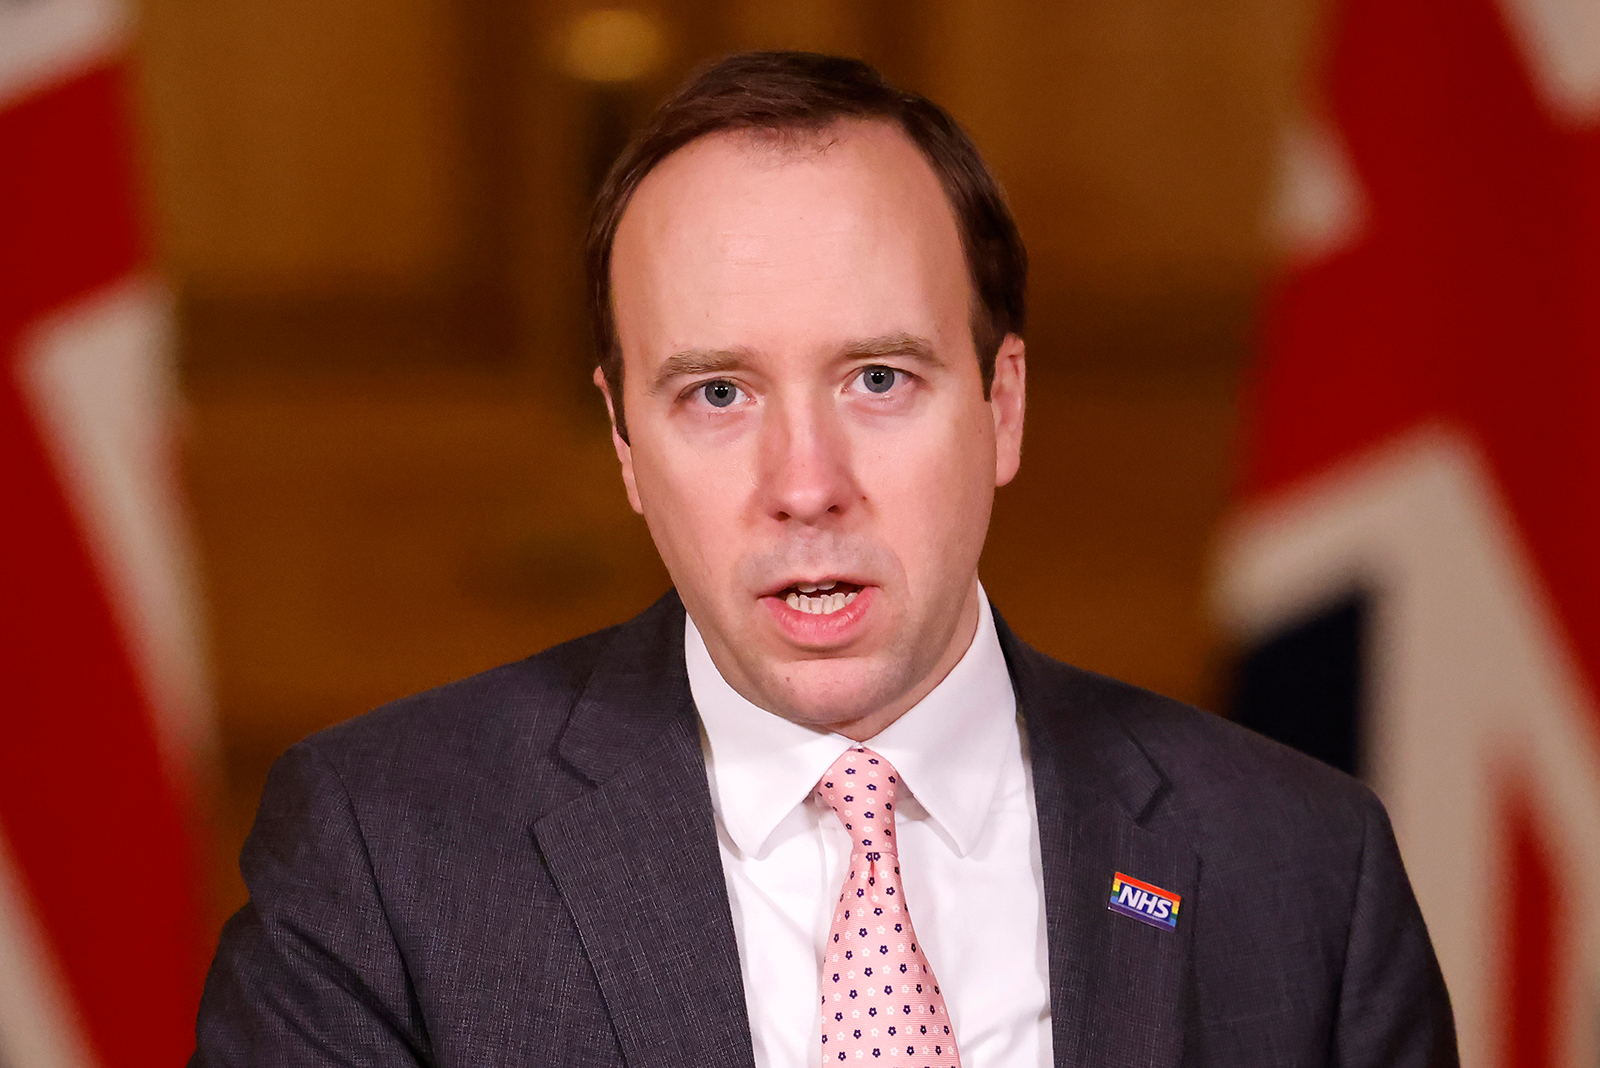 Health Secretary Matt Hancock speaks during a virtual news conference at 10 Downing Street in London, on February 8.